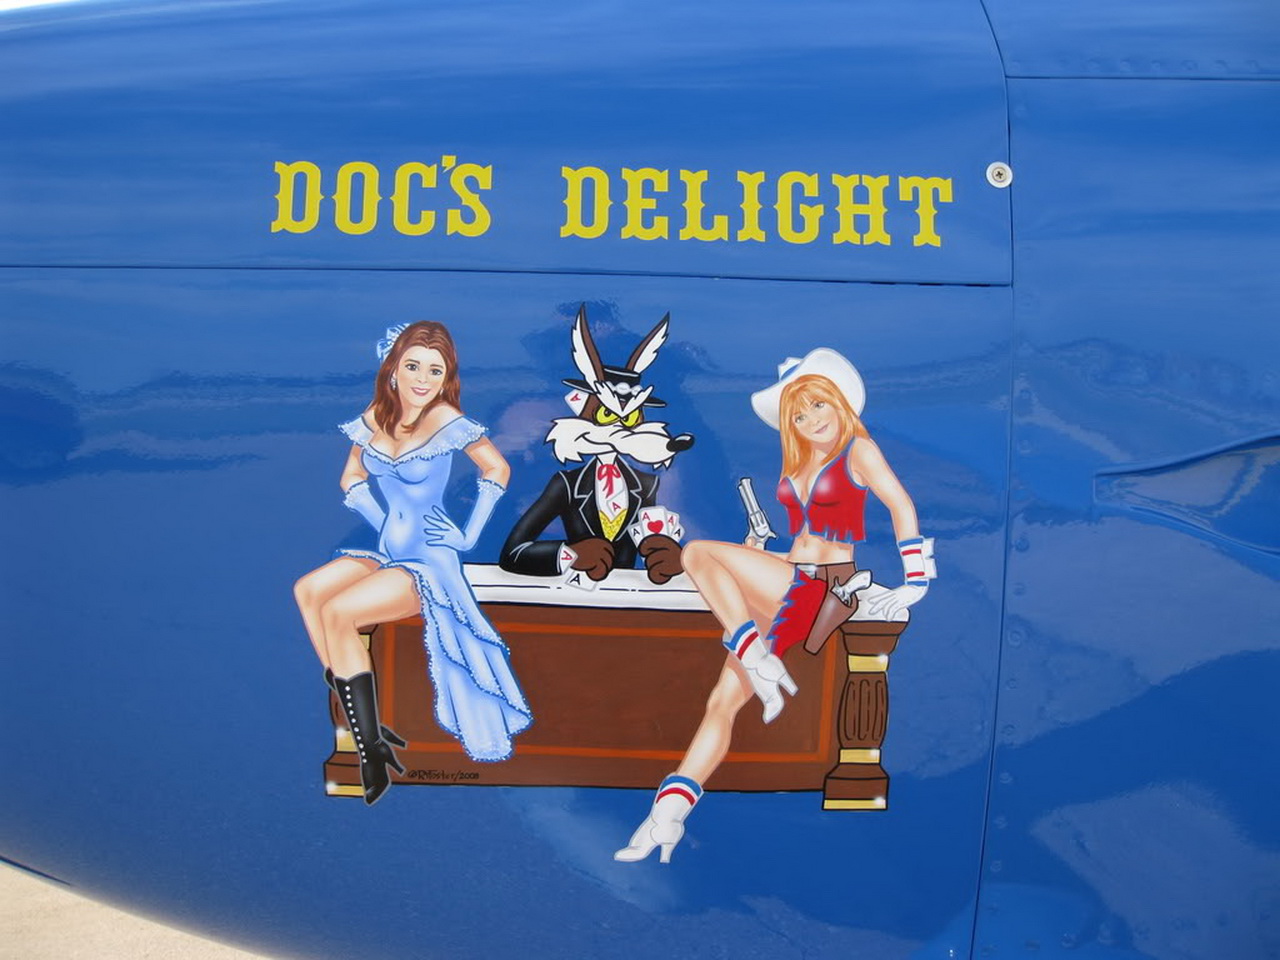 docs delight airplane noseart